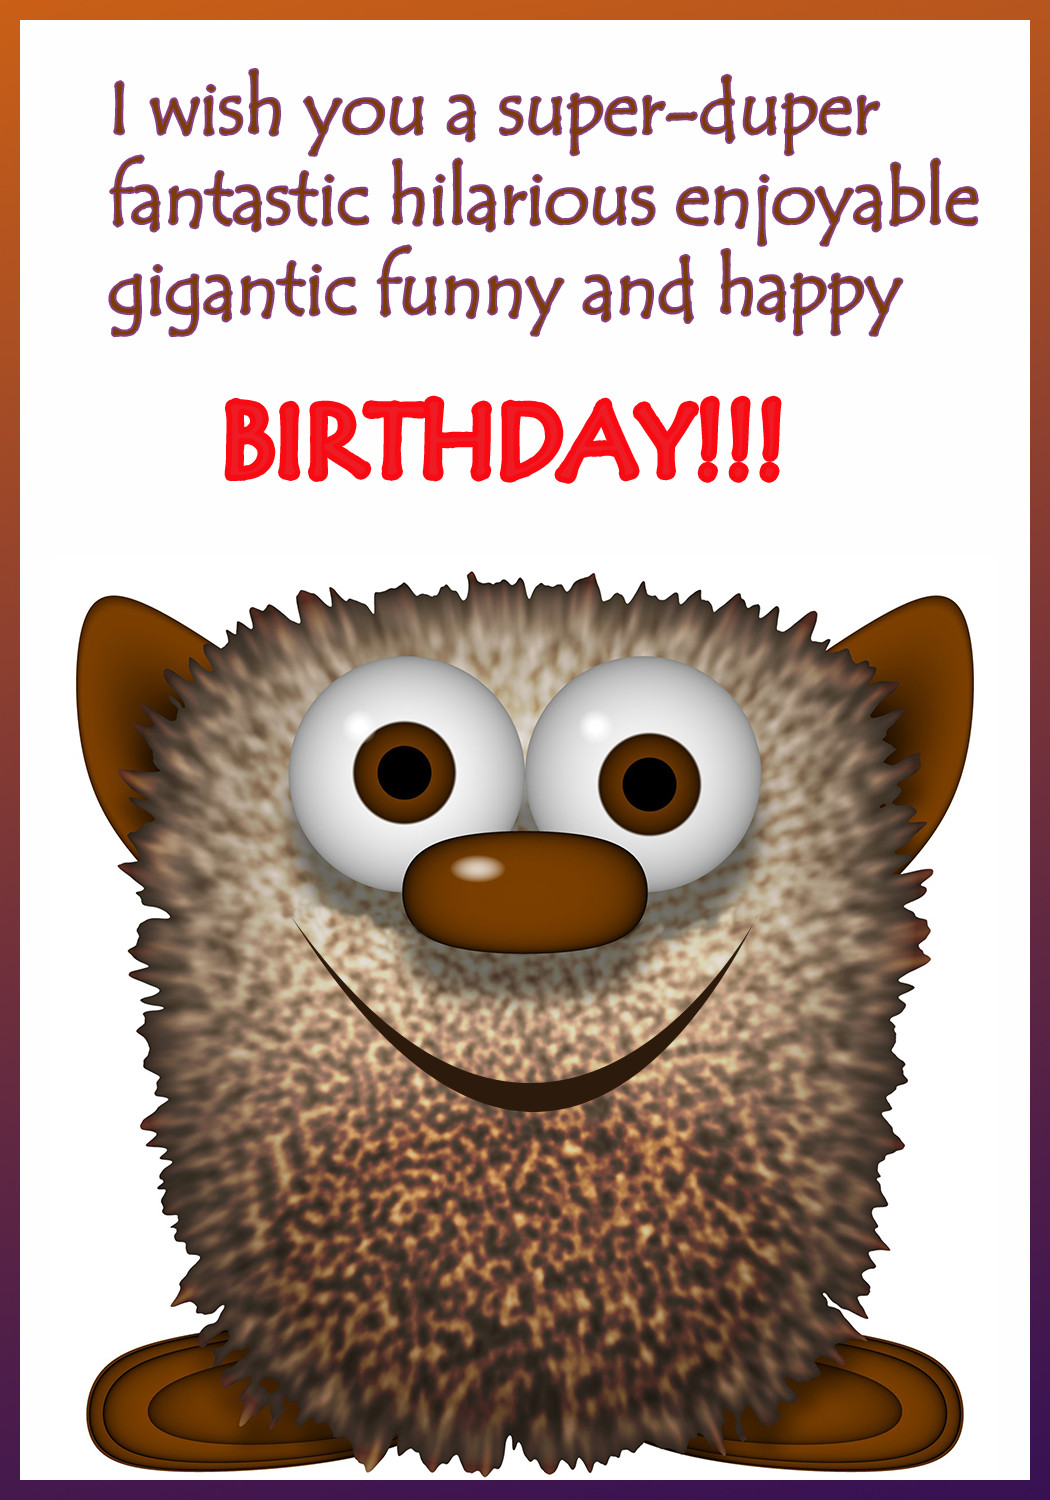 Images Of Funny Birthday Cards
 Funny Printable Birthday Cards